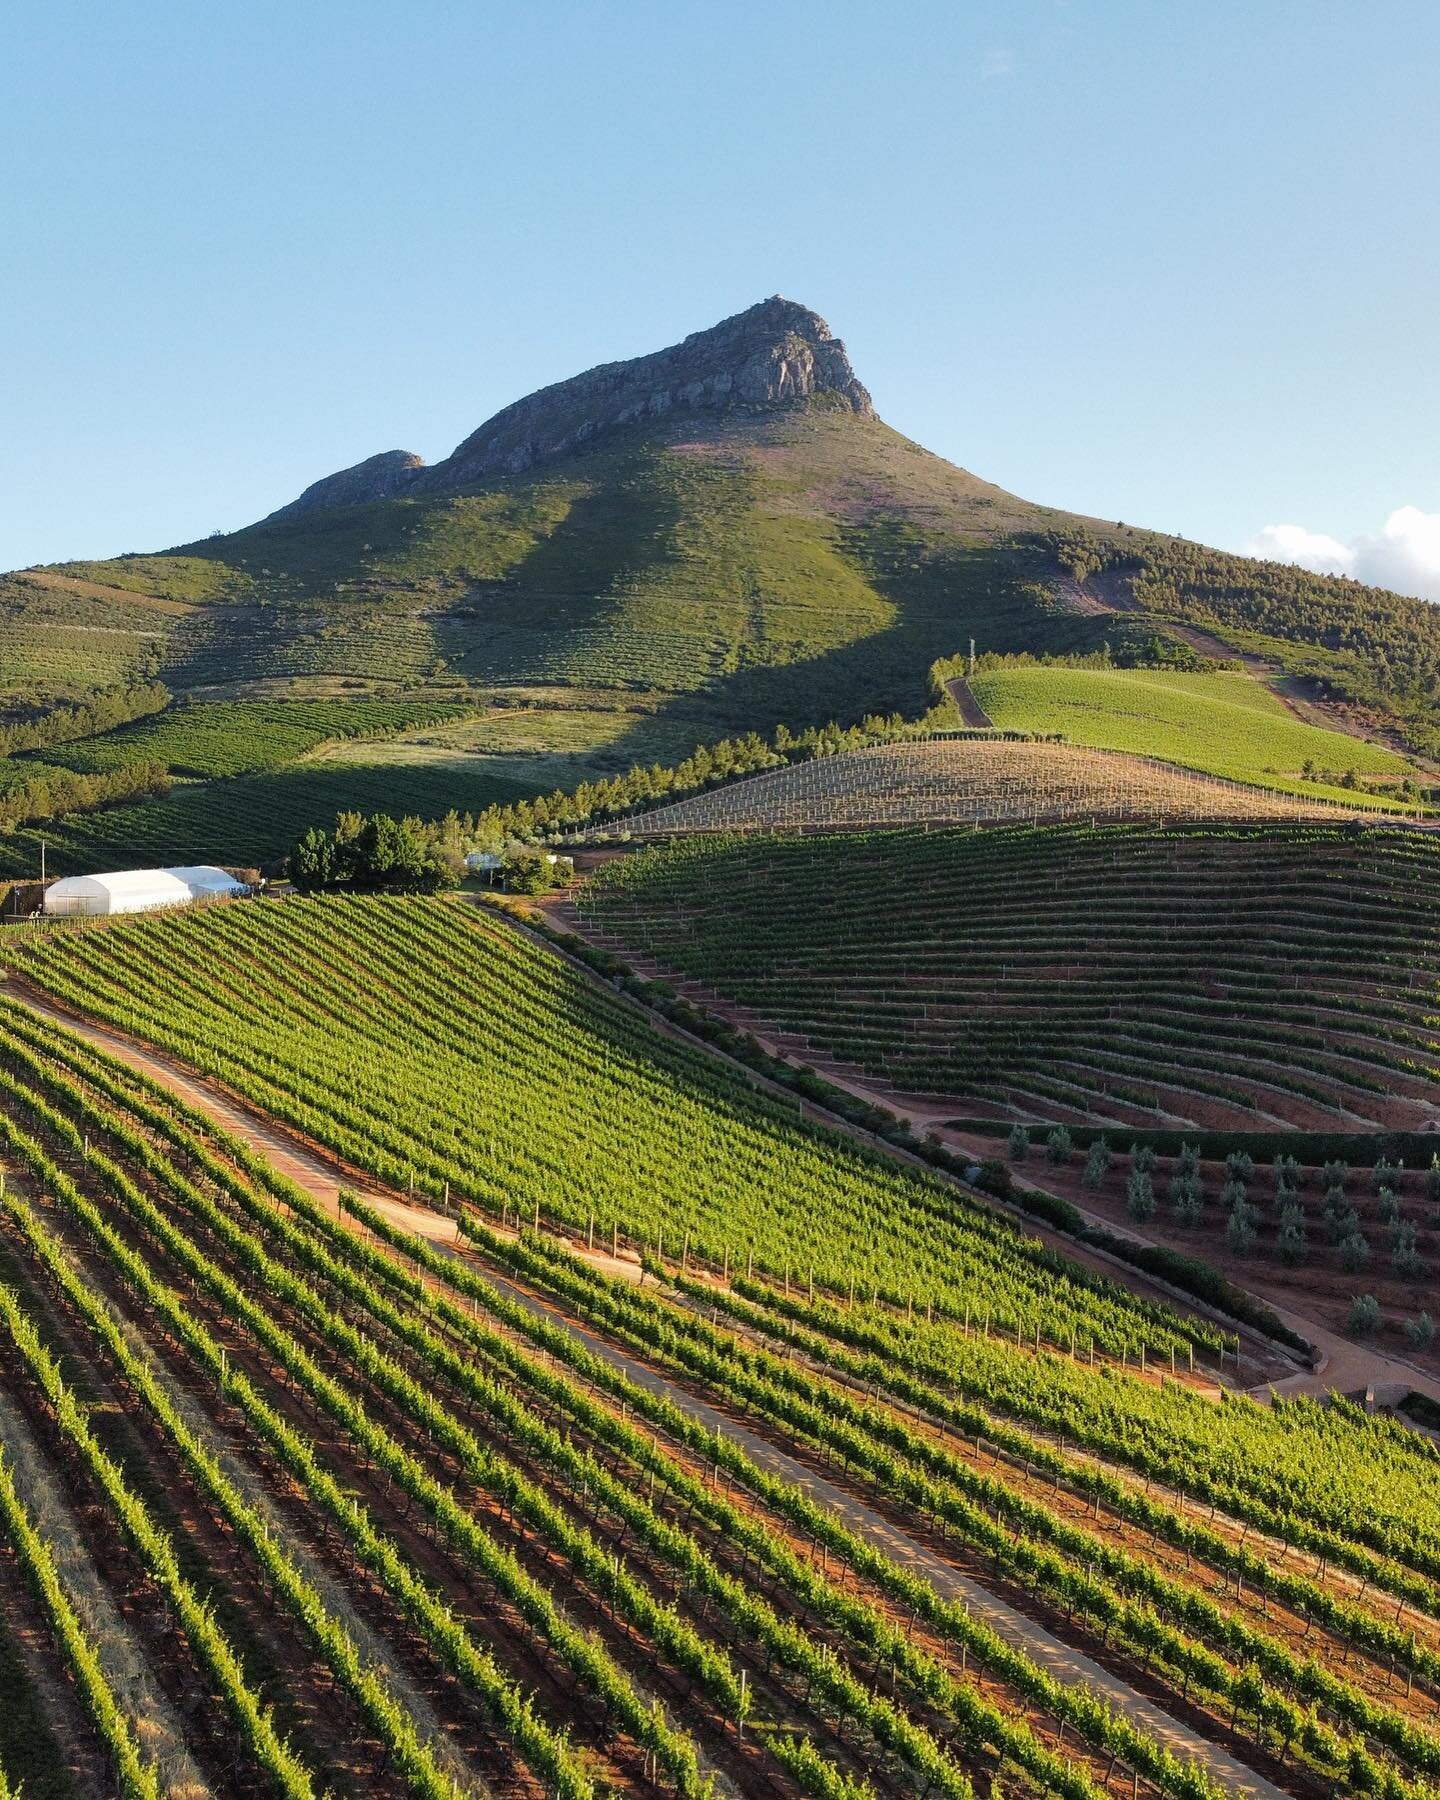 The Few &amp; Far Wine Club &amp; Shop just released a selection of delicious South African wines, so we&rsquo;re giving you all of the details you need to enjoy these bottles to their fullest potential in our latest blog post! 

As a sneak peak, we 